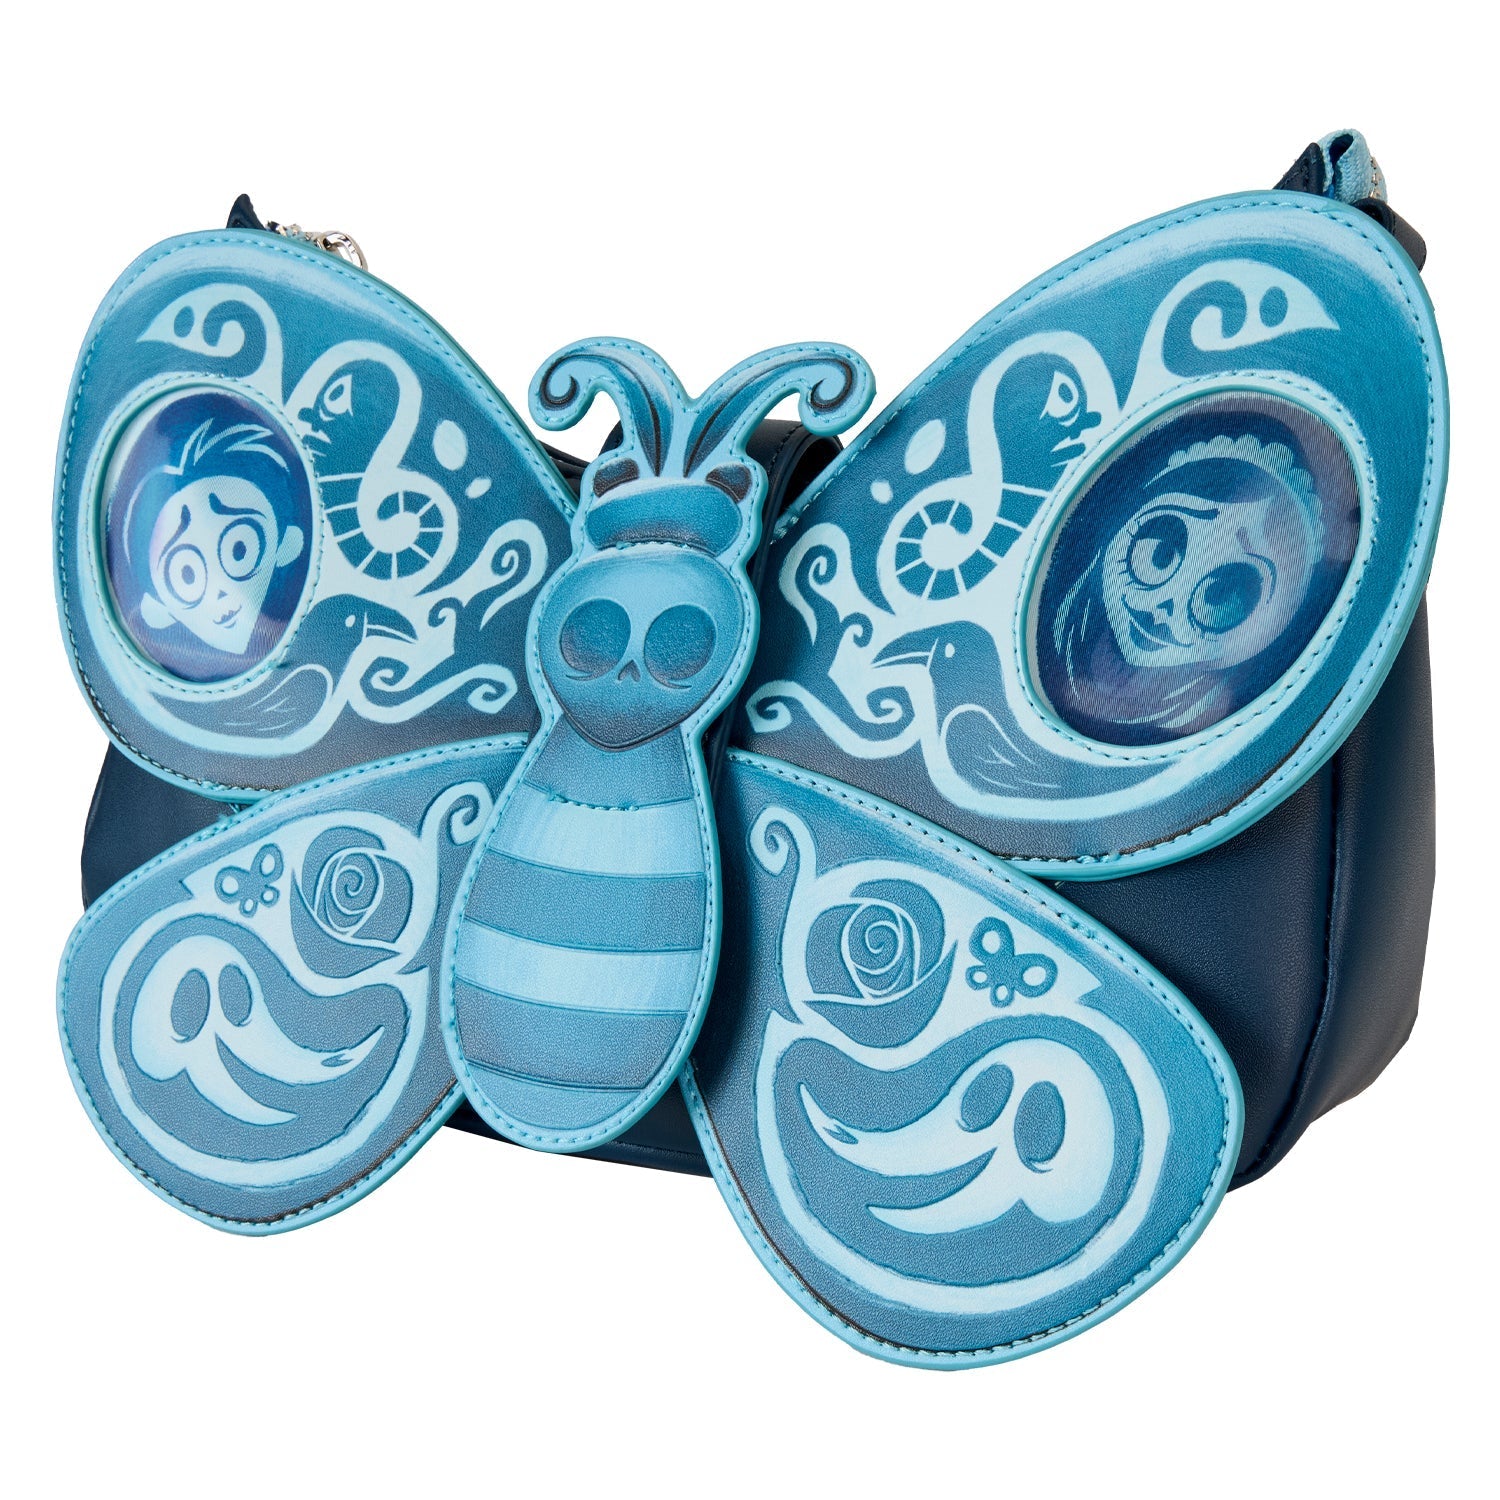 Loungefly x Corpse Bride Butterfly Crossbody Bag - GeekCore